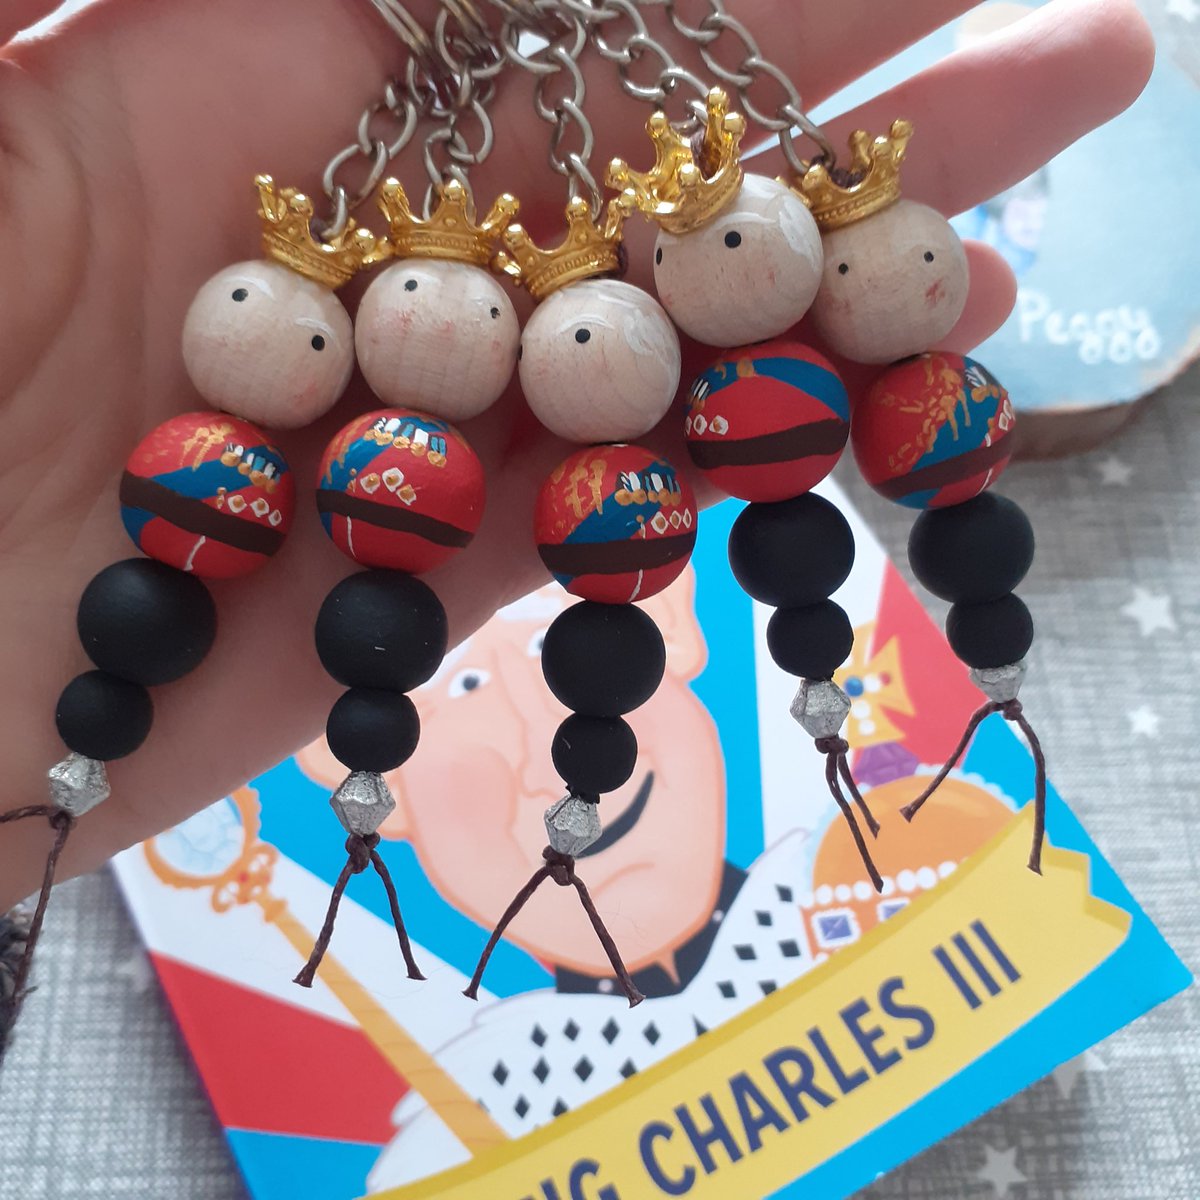 King Charles wanted in on my NEW style Beady Peggy keychains!
Find these in my etsy and buyindie stores #shopindie #earlybiz #etsy #Coronation #shopsmall #UkGifthourAM 
linktr.ee/Littlemisspeggy